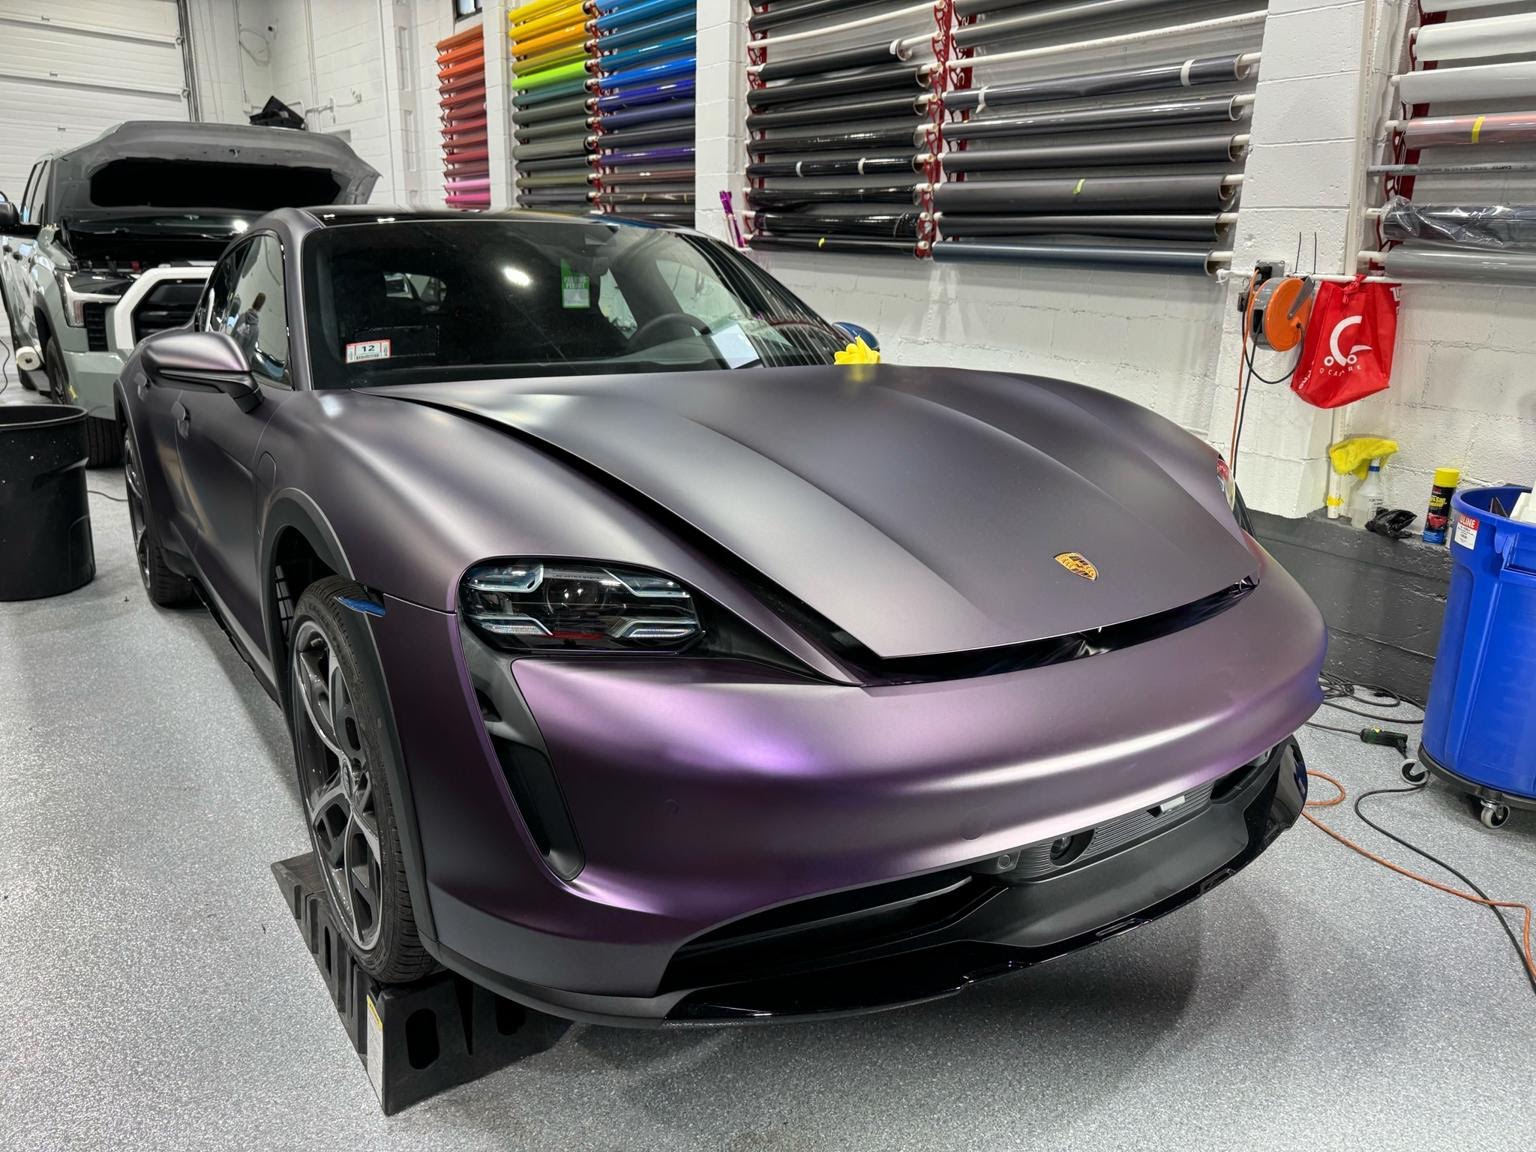 Porsche Taycan Buying a CPOed CT for the wife. Not the color she wants, but good deal. What would it cost to wrap it (East Coast - US)? 97f10e7d3f5140205af4d32f33c56a851ce8760a-2